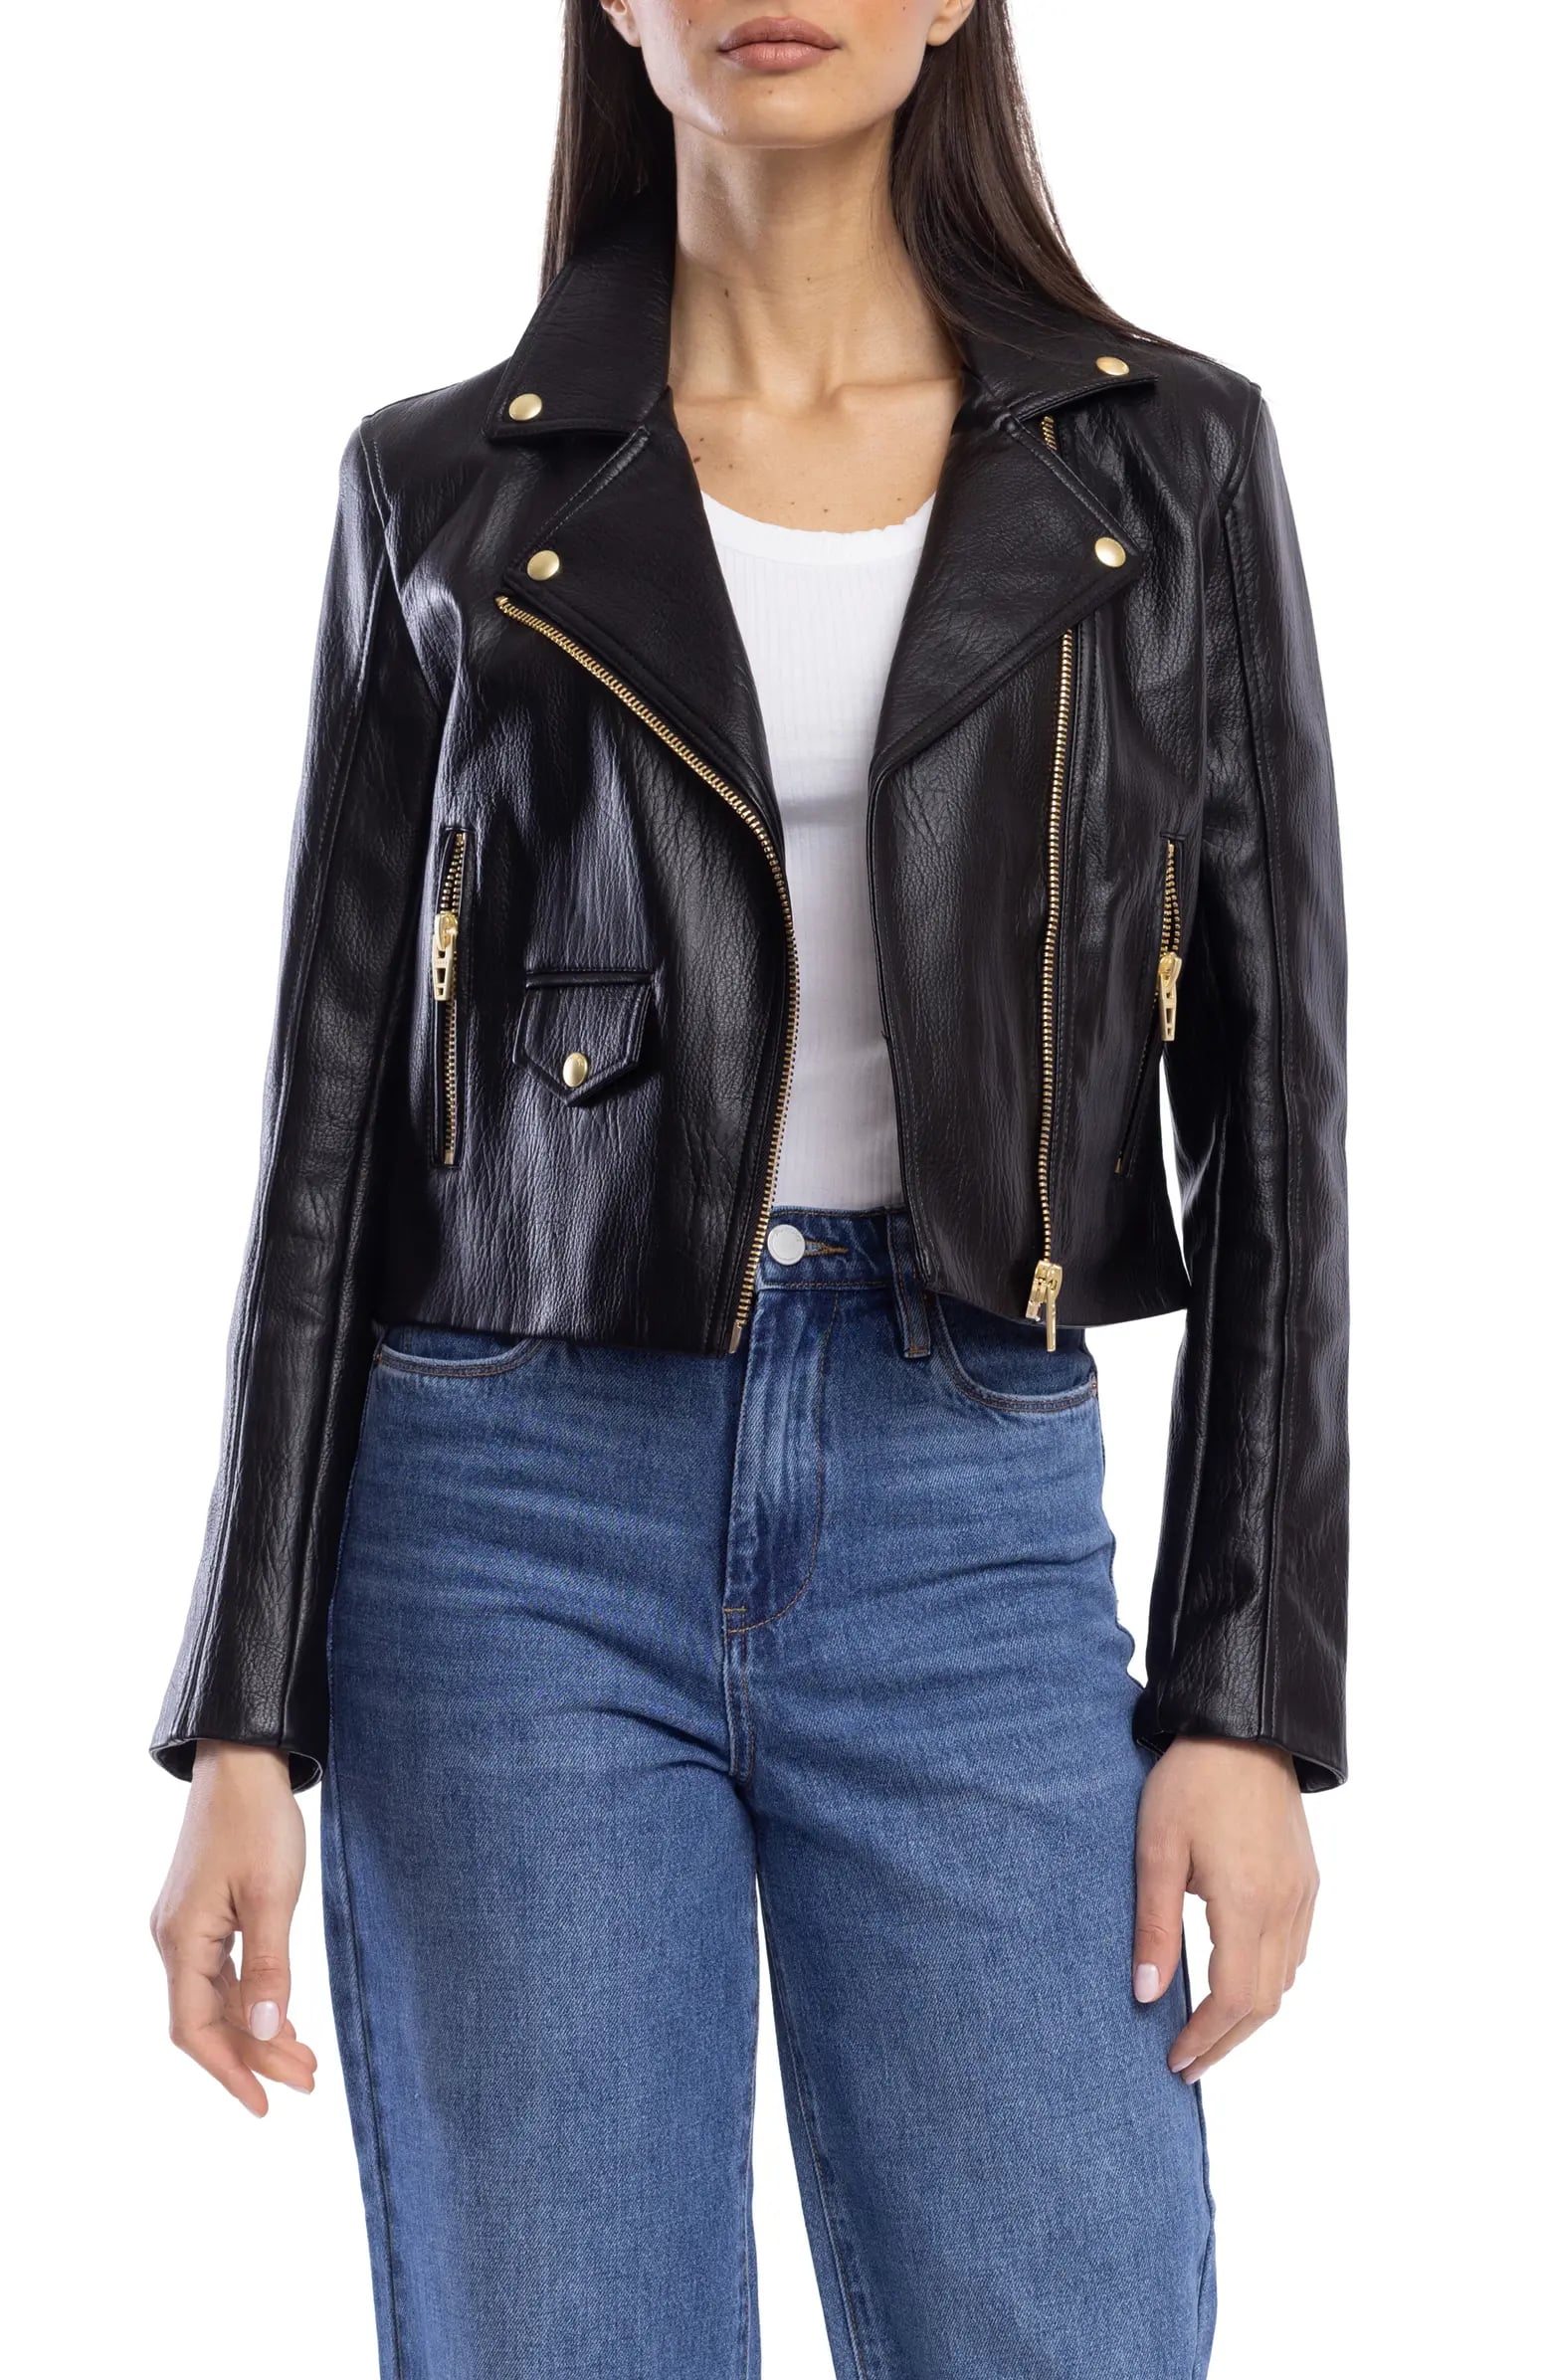 Jackets and Tops: BlankNYC Faux Leather Moto Jacket | 36 of Our Top Fashion  Picks From the Nordstrom Anniversary Sale | POPSUGAR Fashion Photo 6